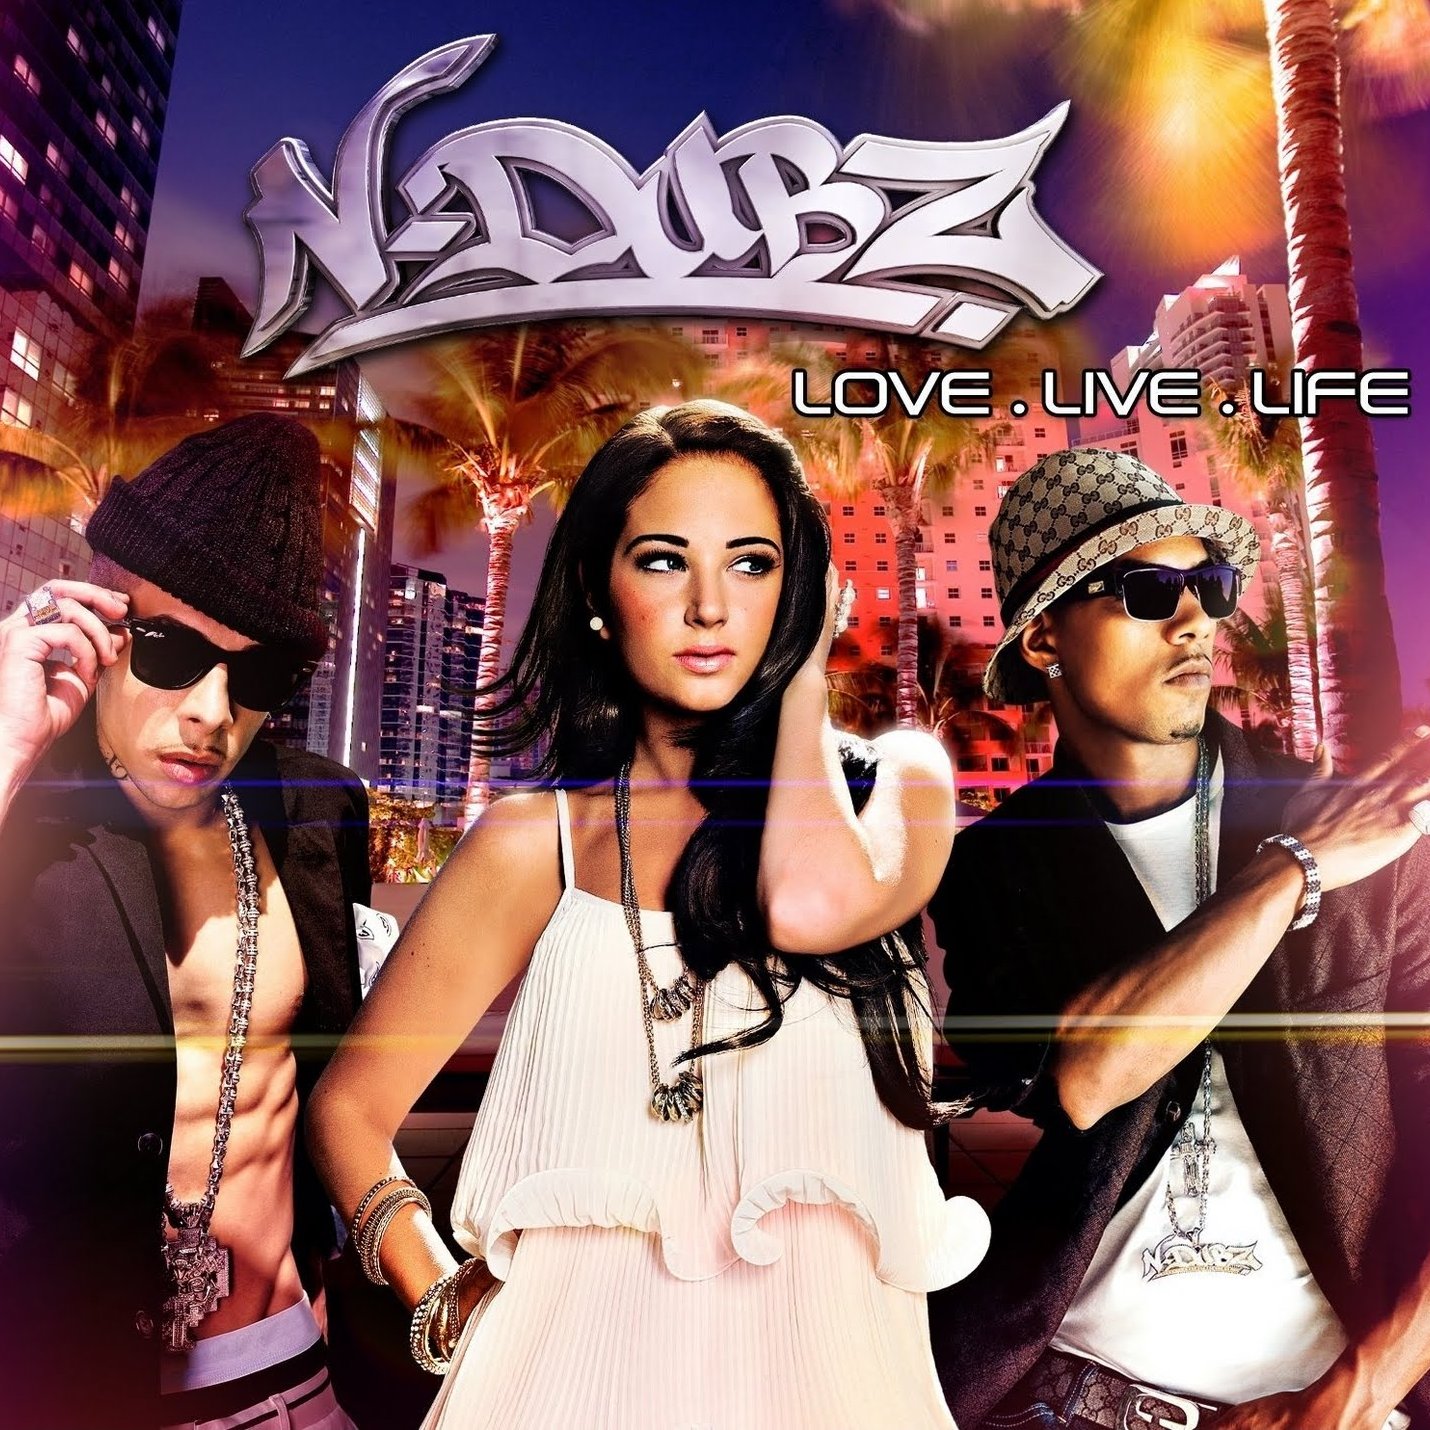 Playing with Fire (N-Dubz song) - Wikipedia